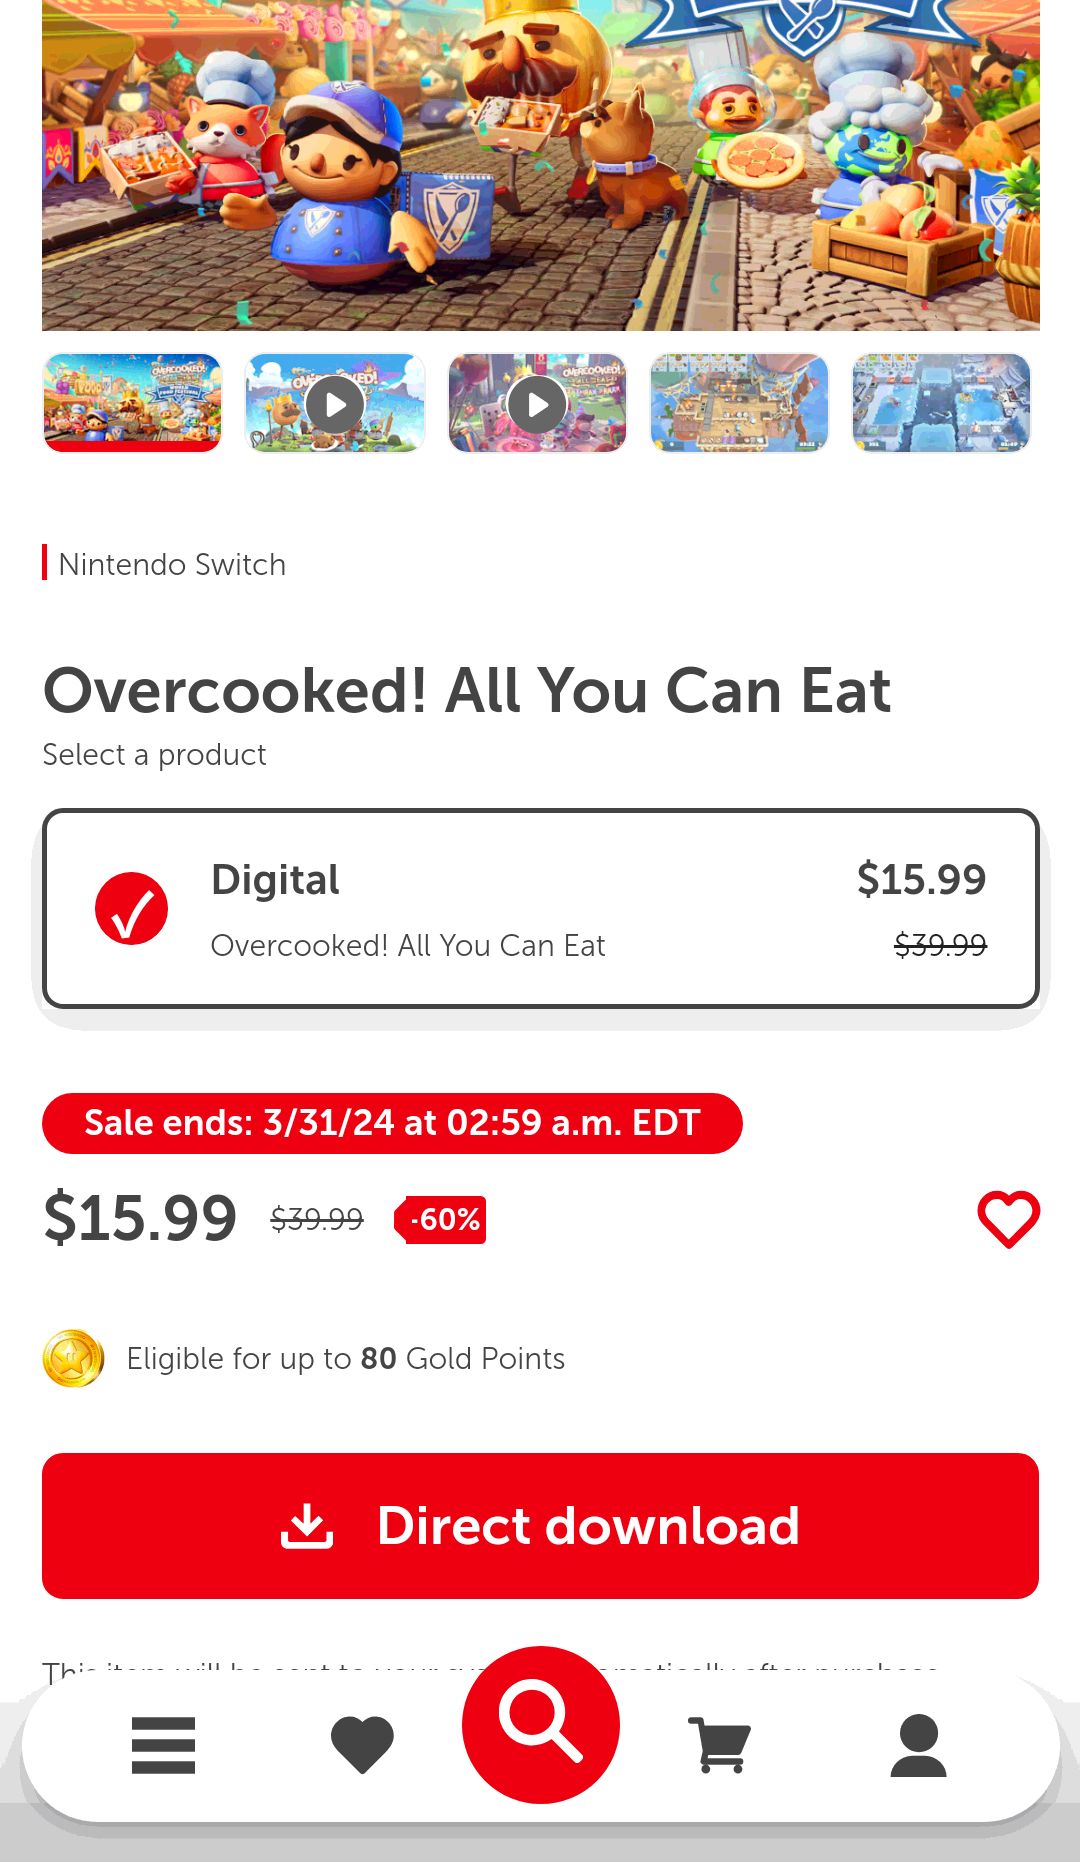 Overcooked! All You Can Eat for Nintendo Switch - Nintendo Official Site《分手厨房：自助餐》Switch 数字版 两部作品+全部DLC